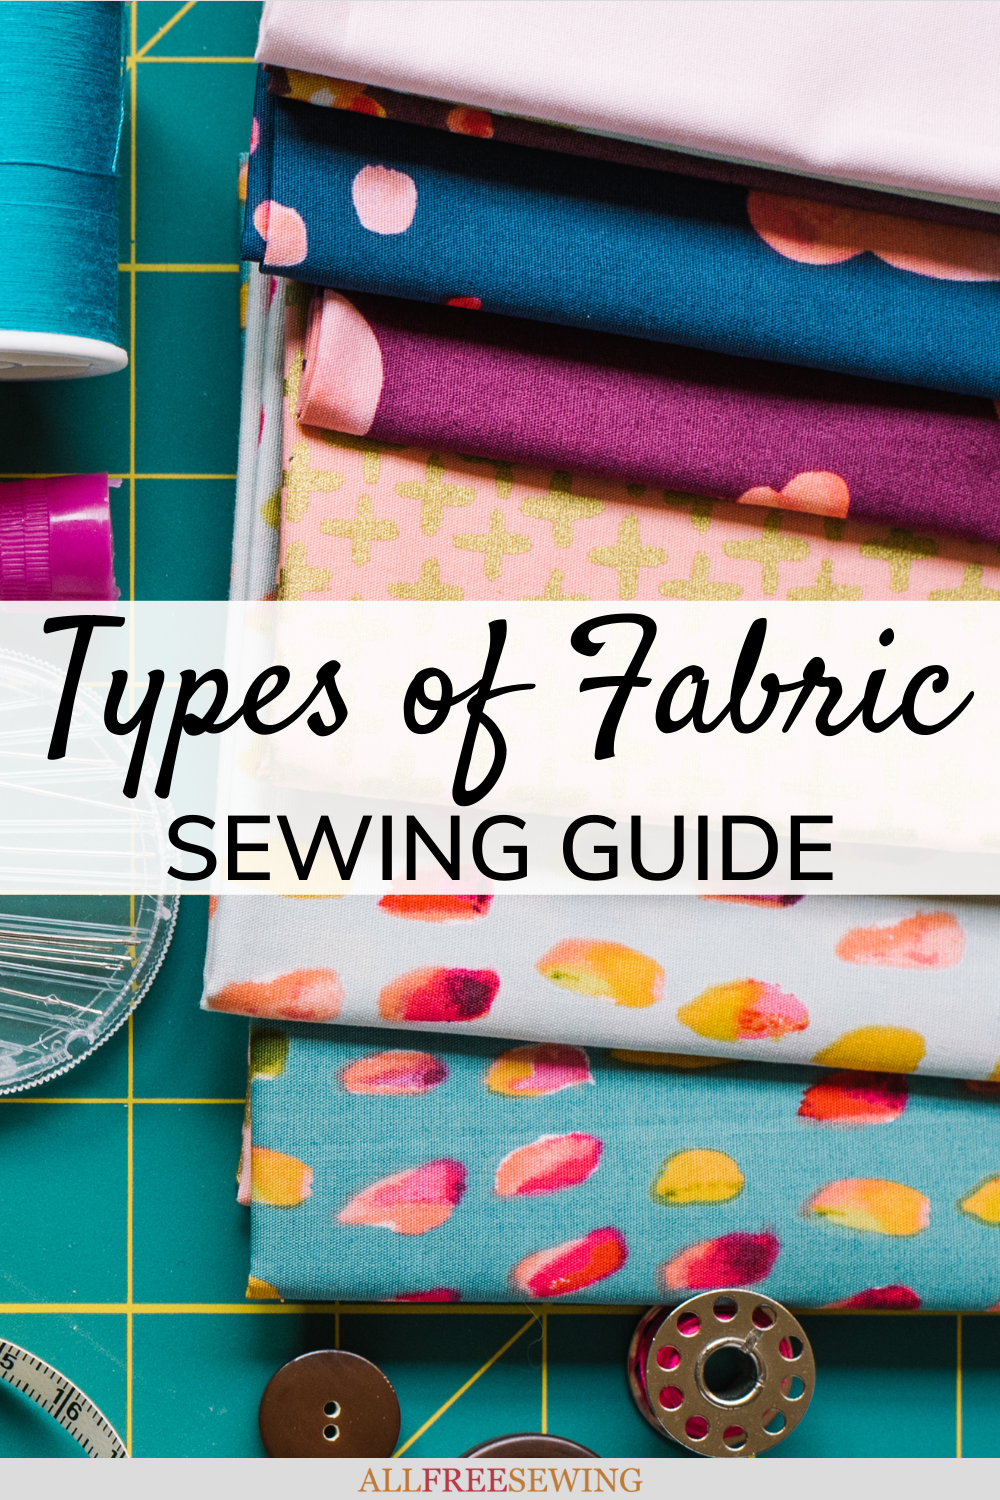 45 Different {TYPES OF SLEEVES} that you can add to your clothes - SewGuide